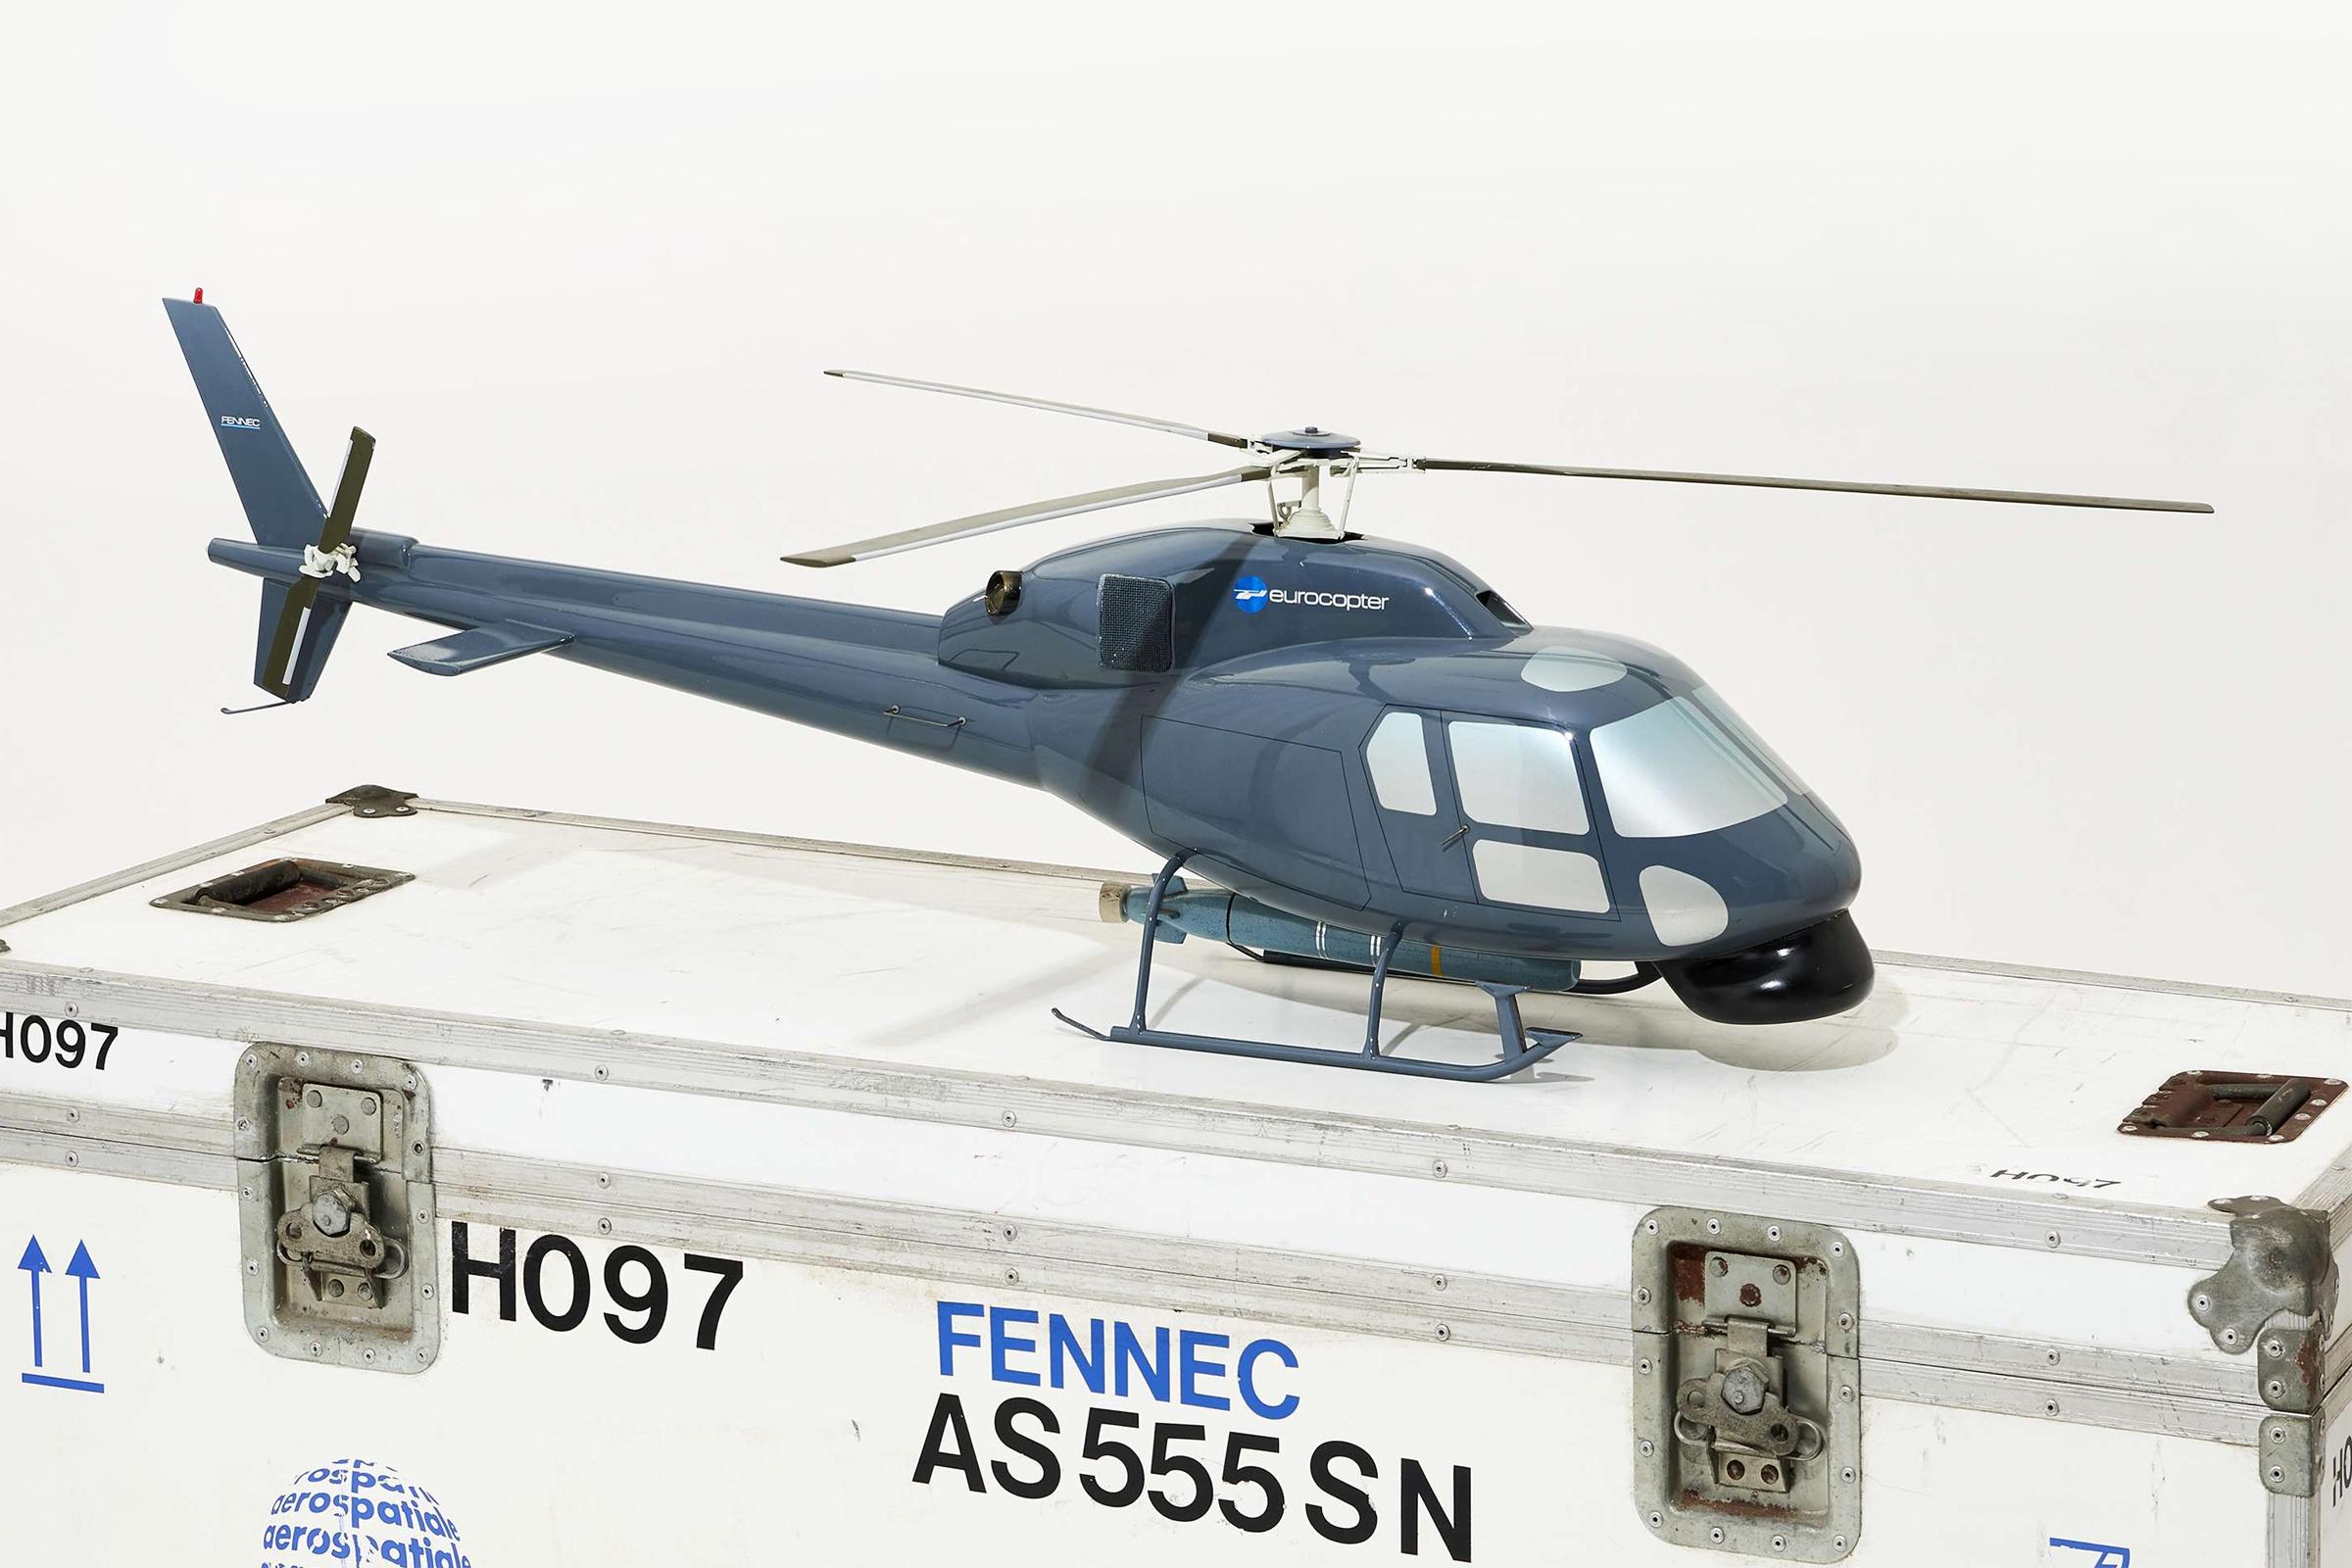 Model Fennec AS555 Helicopter with transport box,
eurocopter AS555 Fennec model of the light transport 
helicopter, 1/10th scale, in resin.
In an Aerospace Transport Box.
Case: L 146 x P 52 x H 75cm.
Model: L129 x P 25 x H 35cm.
Model and box price: